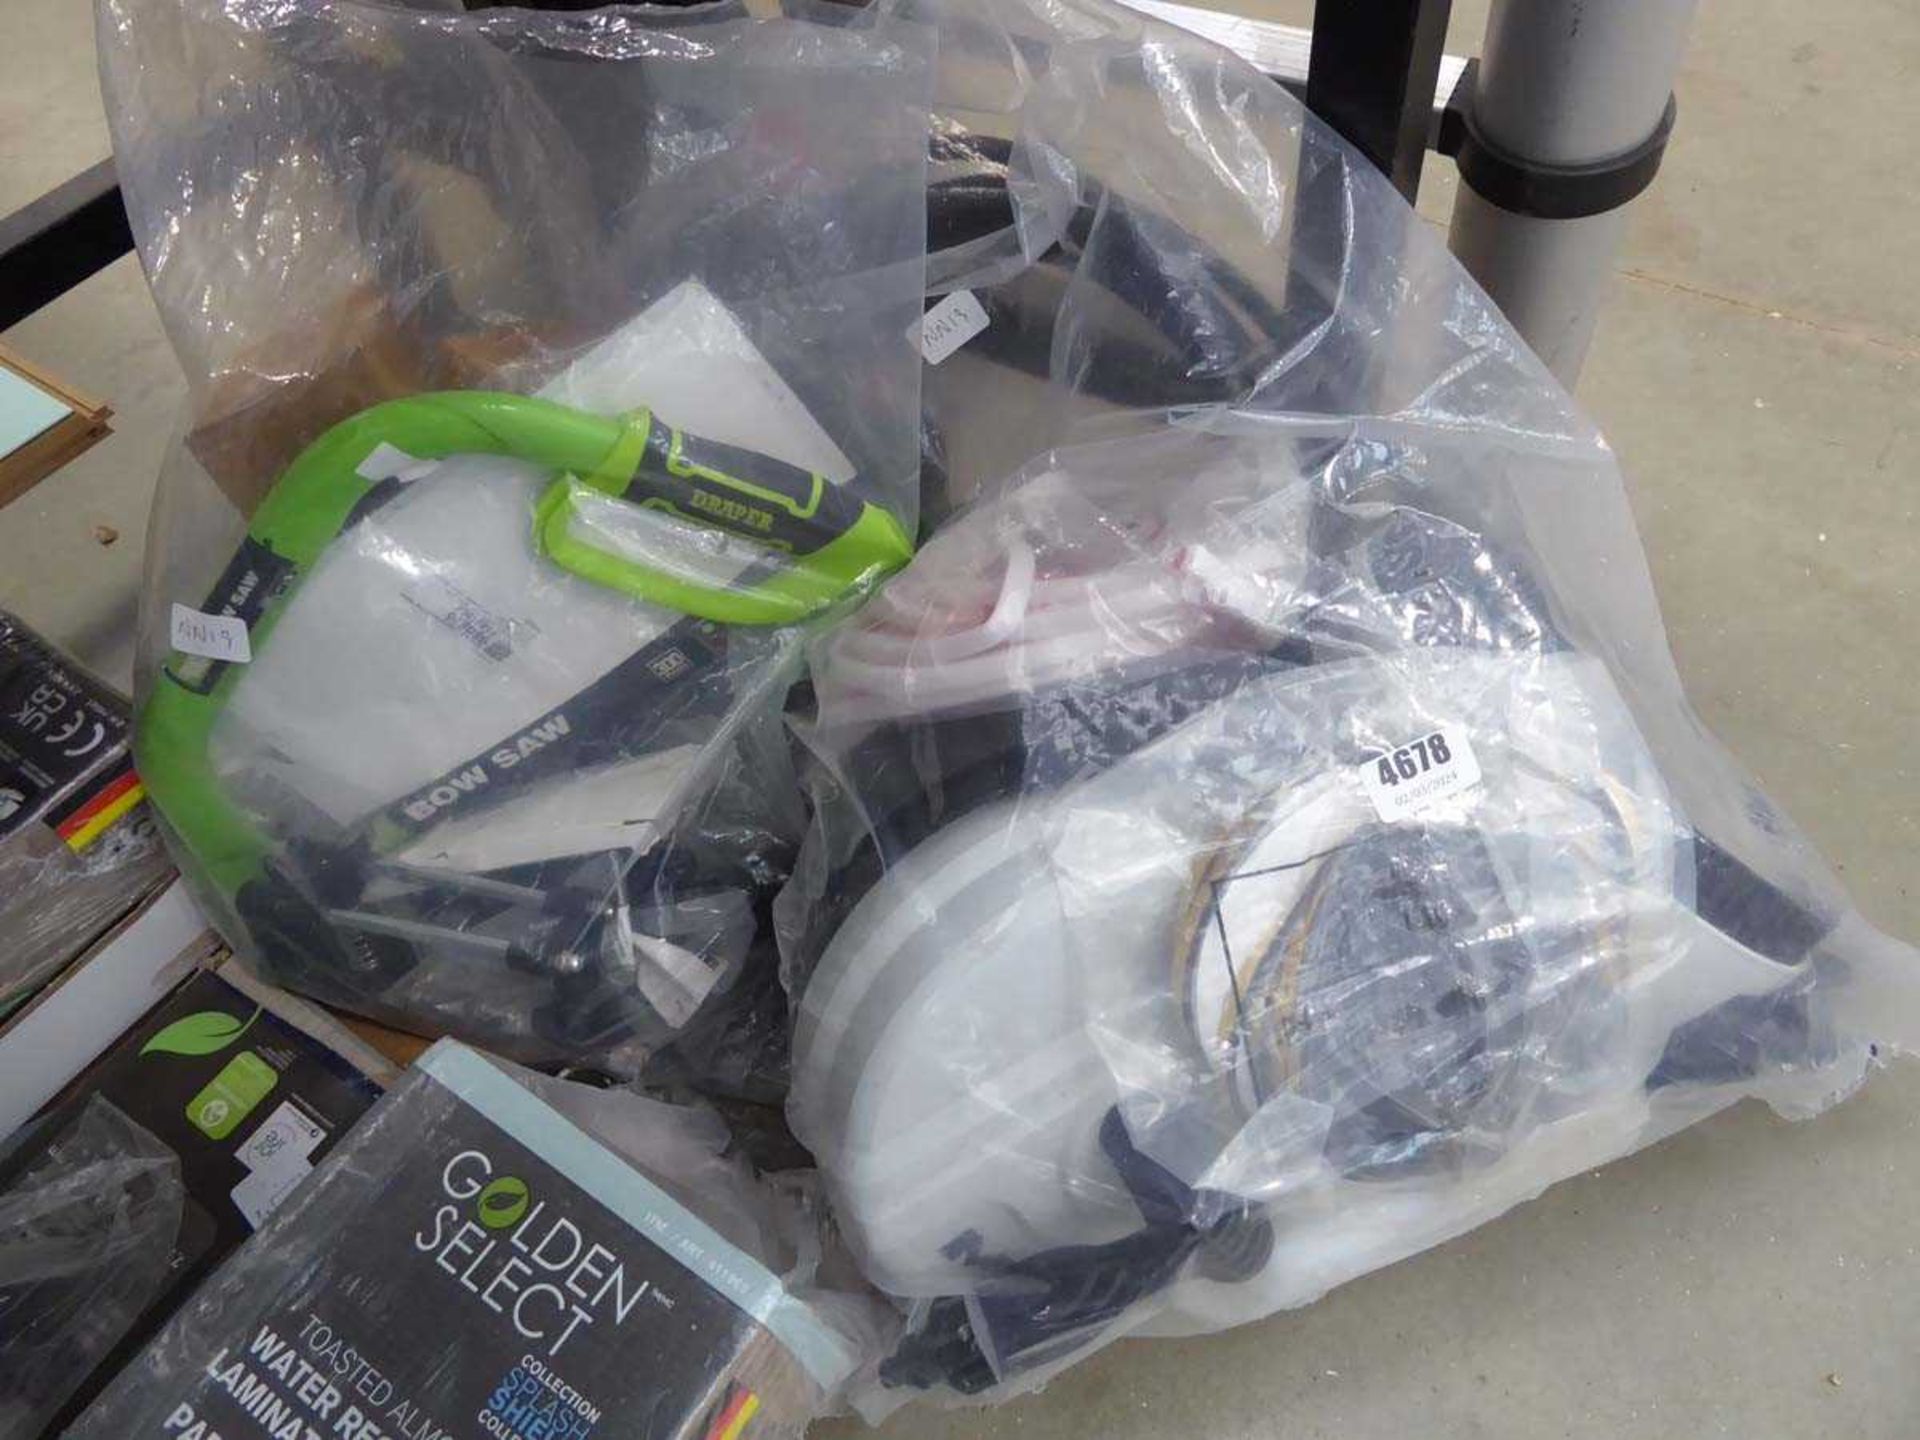 2 x bags containing pressure washer spares and various other small tools and accessories